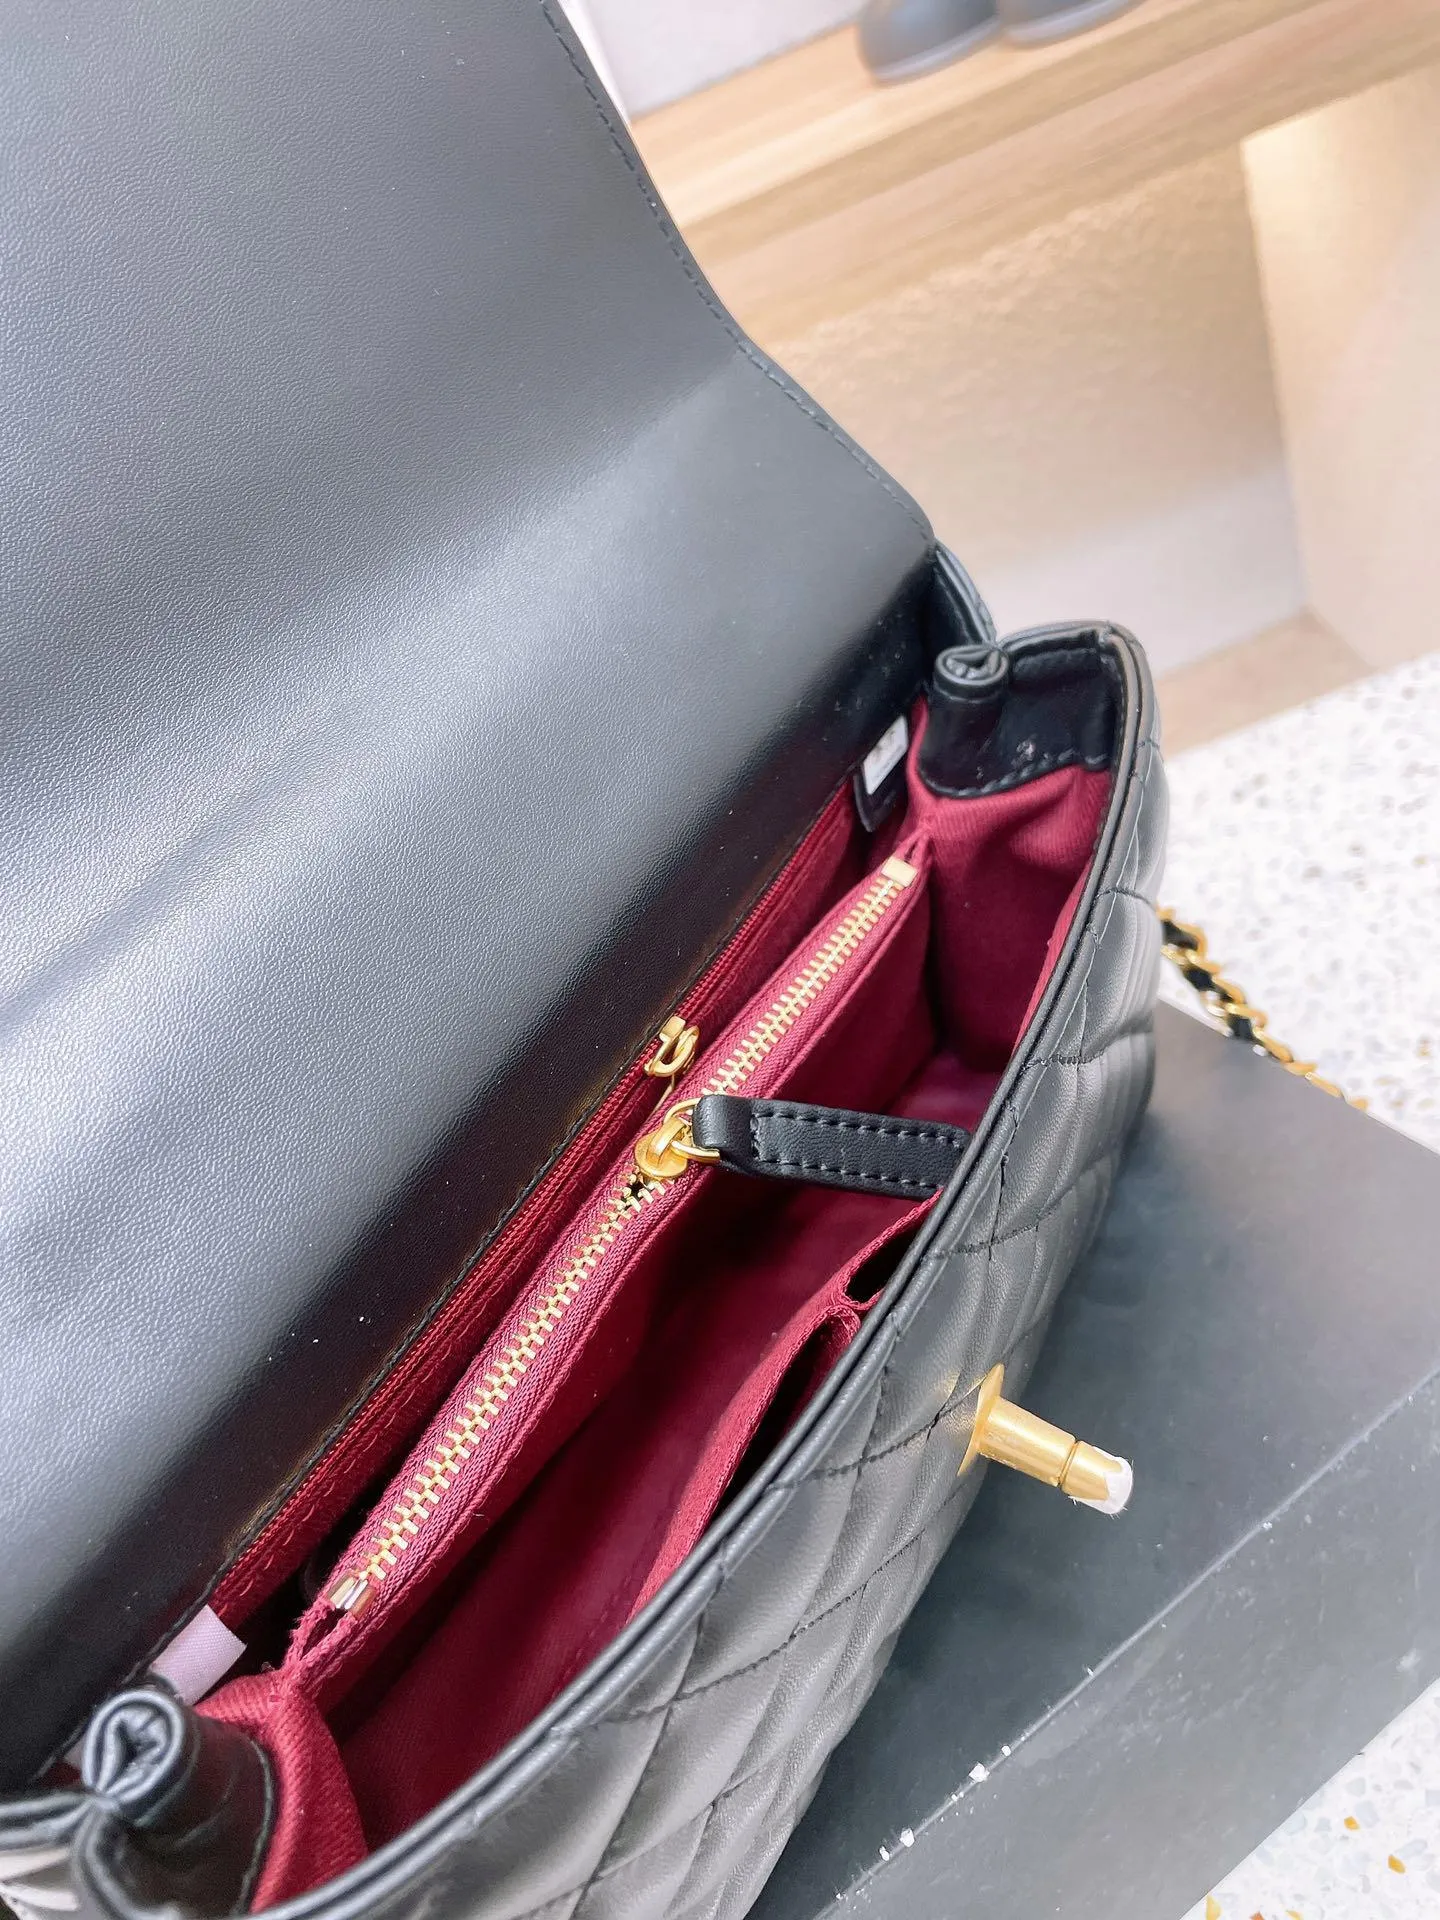 top quality Crossbody Designer Bags luxurious Small 25cm fashion bag shoulder designers women handbags lambs leather clutch with badge gold chain flap purse wallet